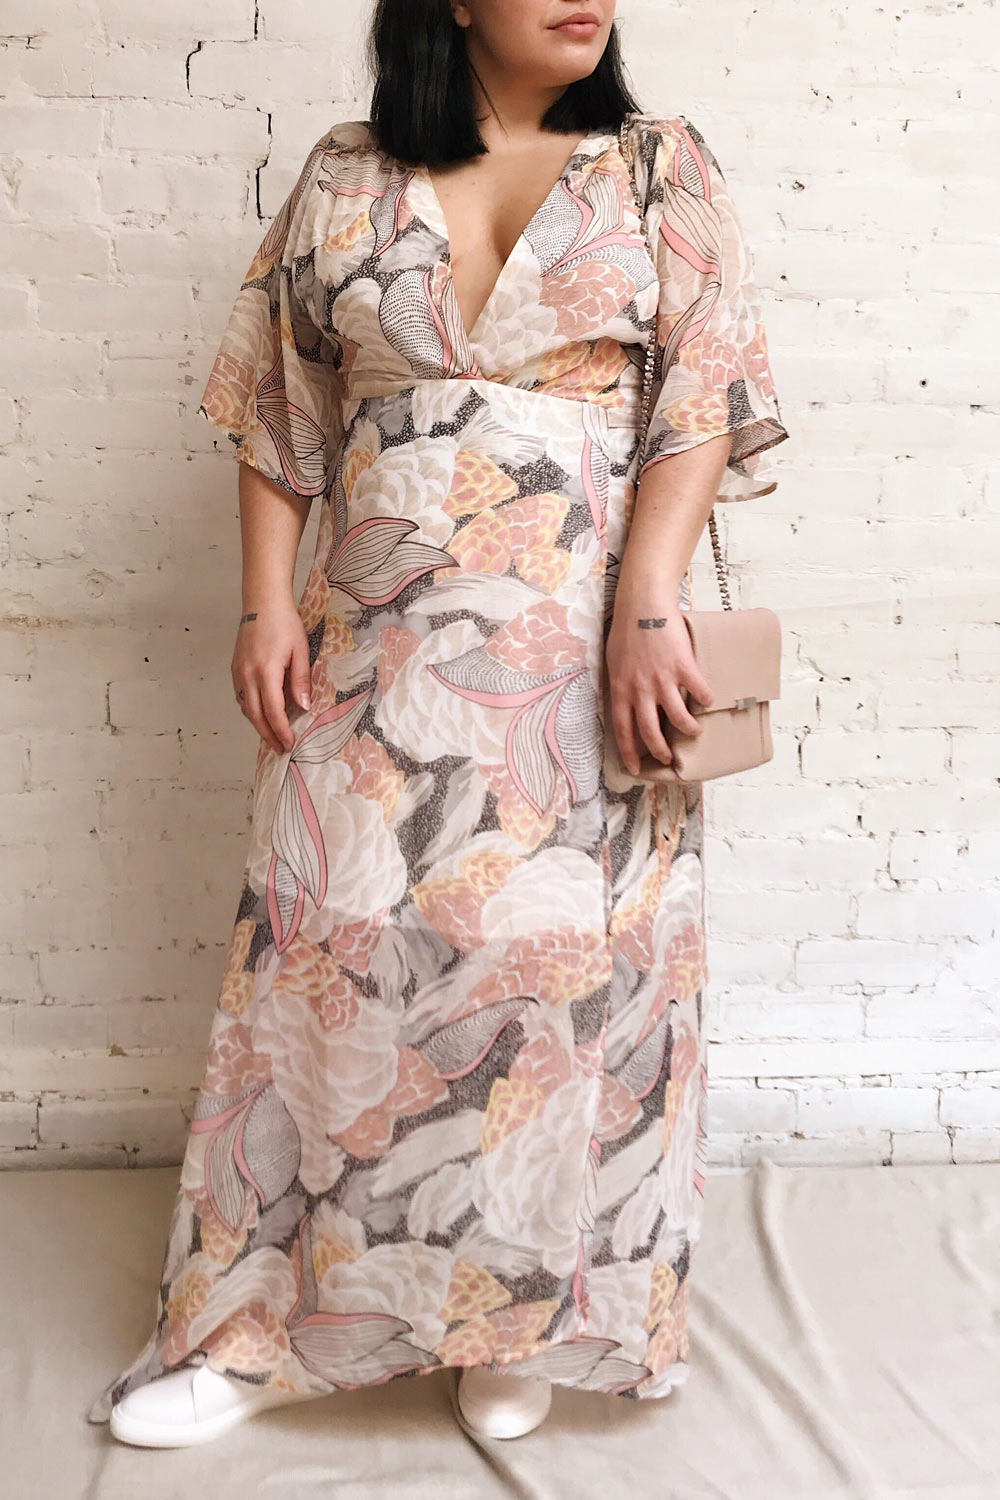 Abhaya Beige Patterned Maxi Wrap Dress | Boutique 1861 model look